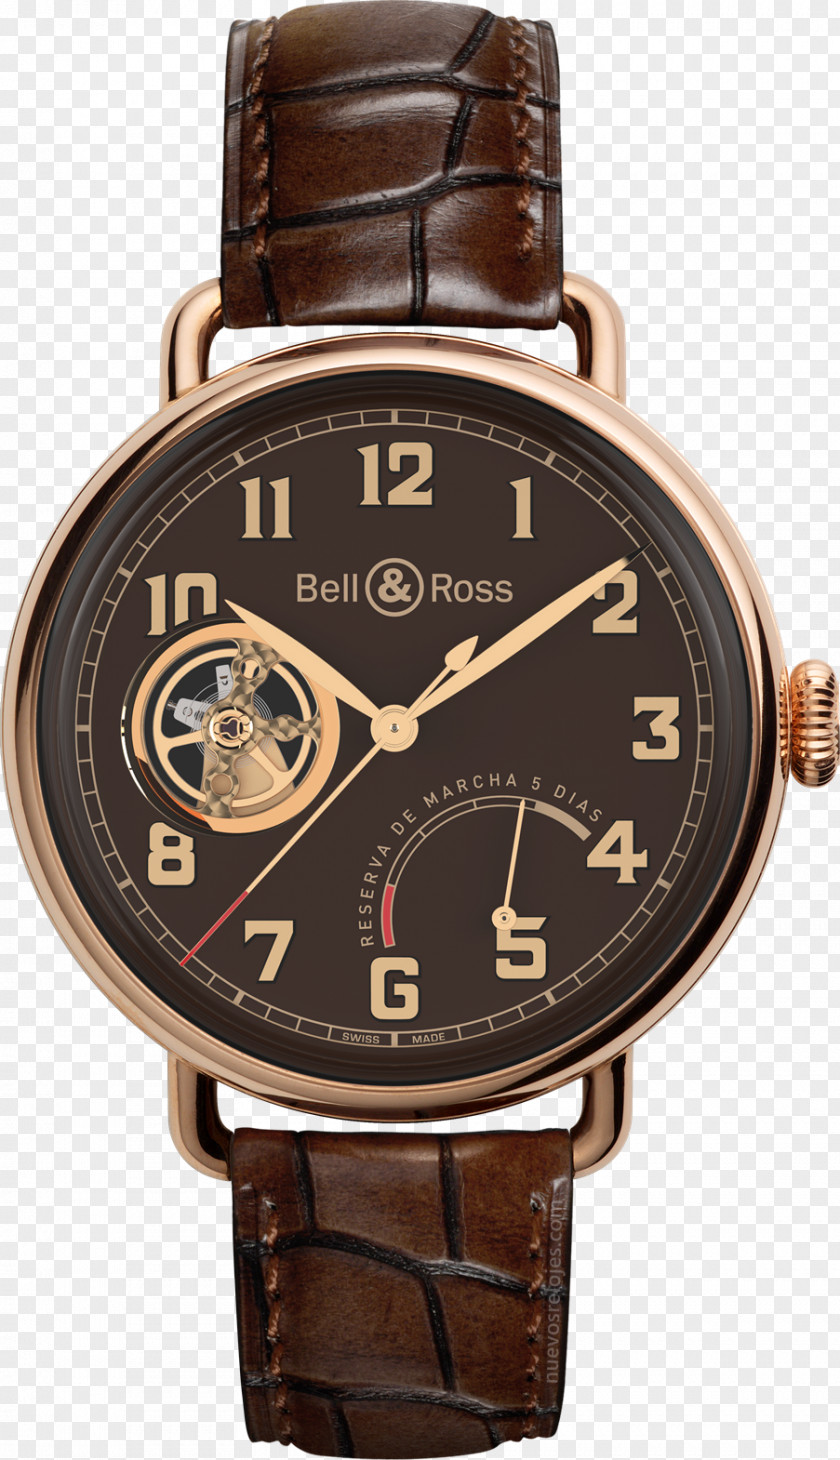 Watch Bell & Ross, Inc. Automatic Movement PNG